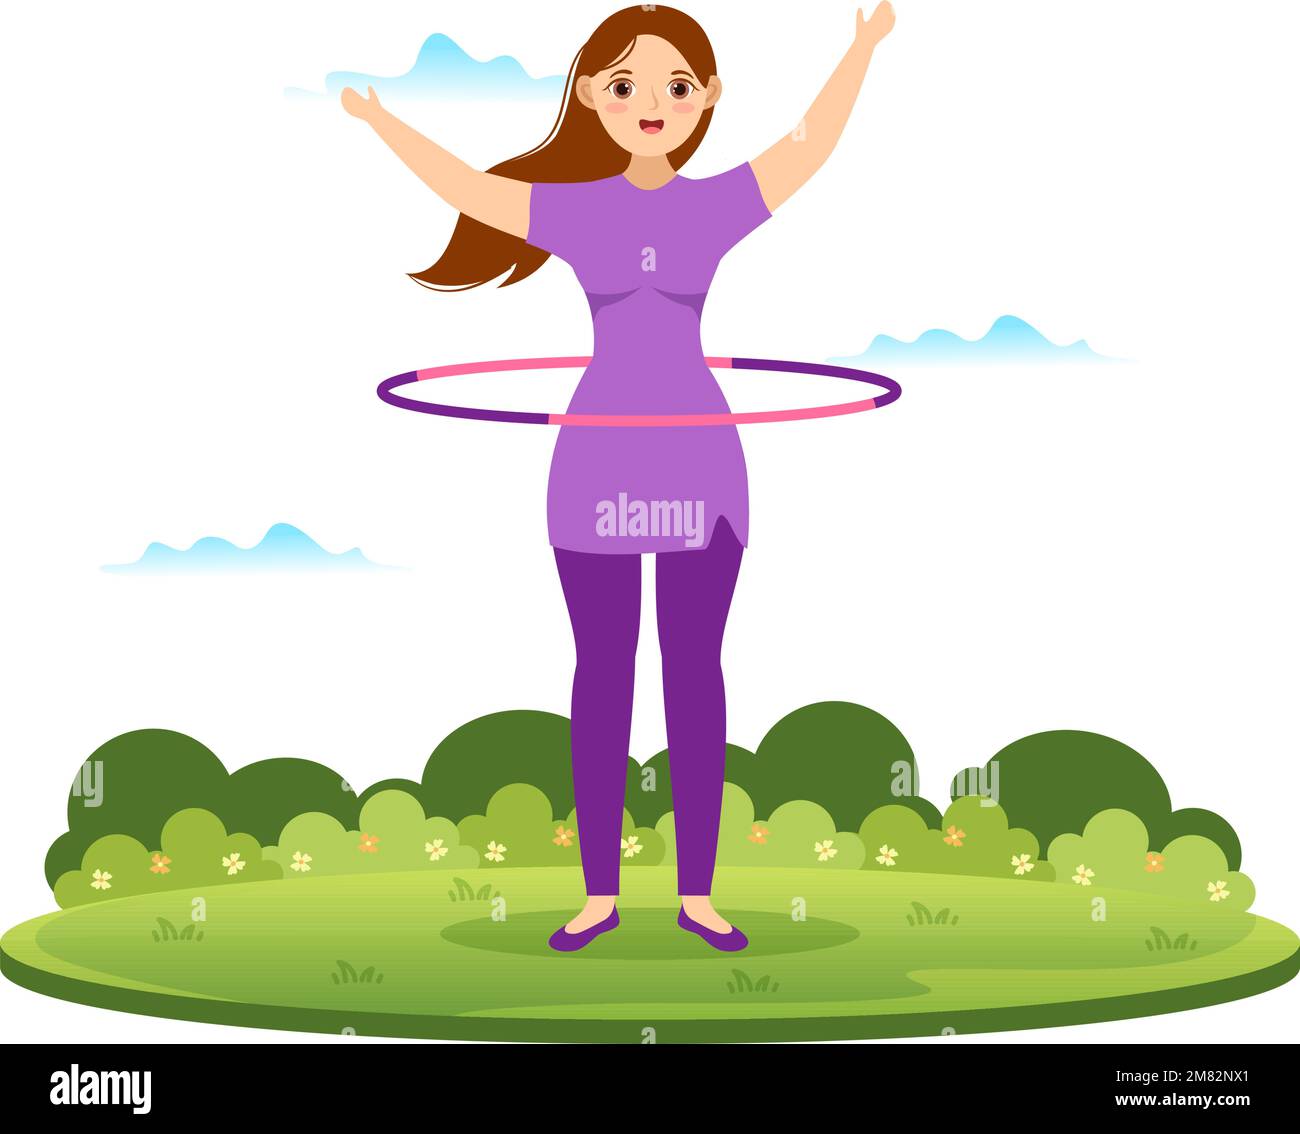 Hula Hoop Illustration with People Exercising Playing Hula Hoops and Fitness Training in Sports Activity Flat Cartoon Hand Drawn Templates Stock Vector